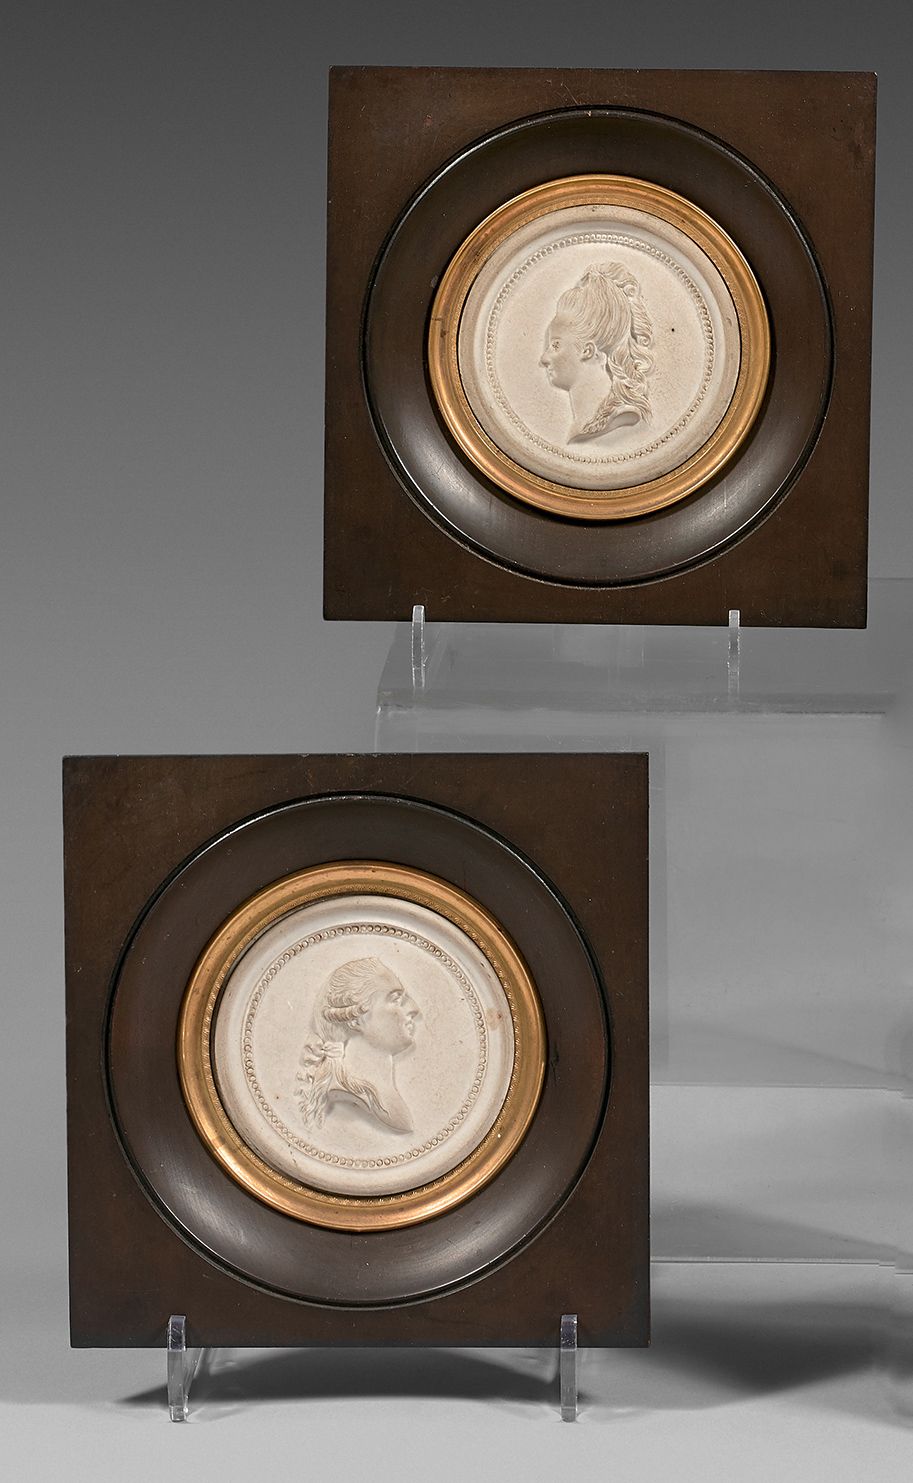 Null Pair of 18th century porcelain medallions, probably Sèvres
Representing Lou&hellip;